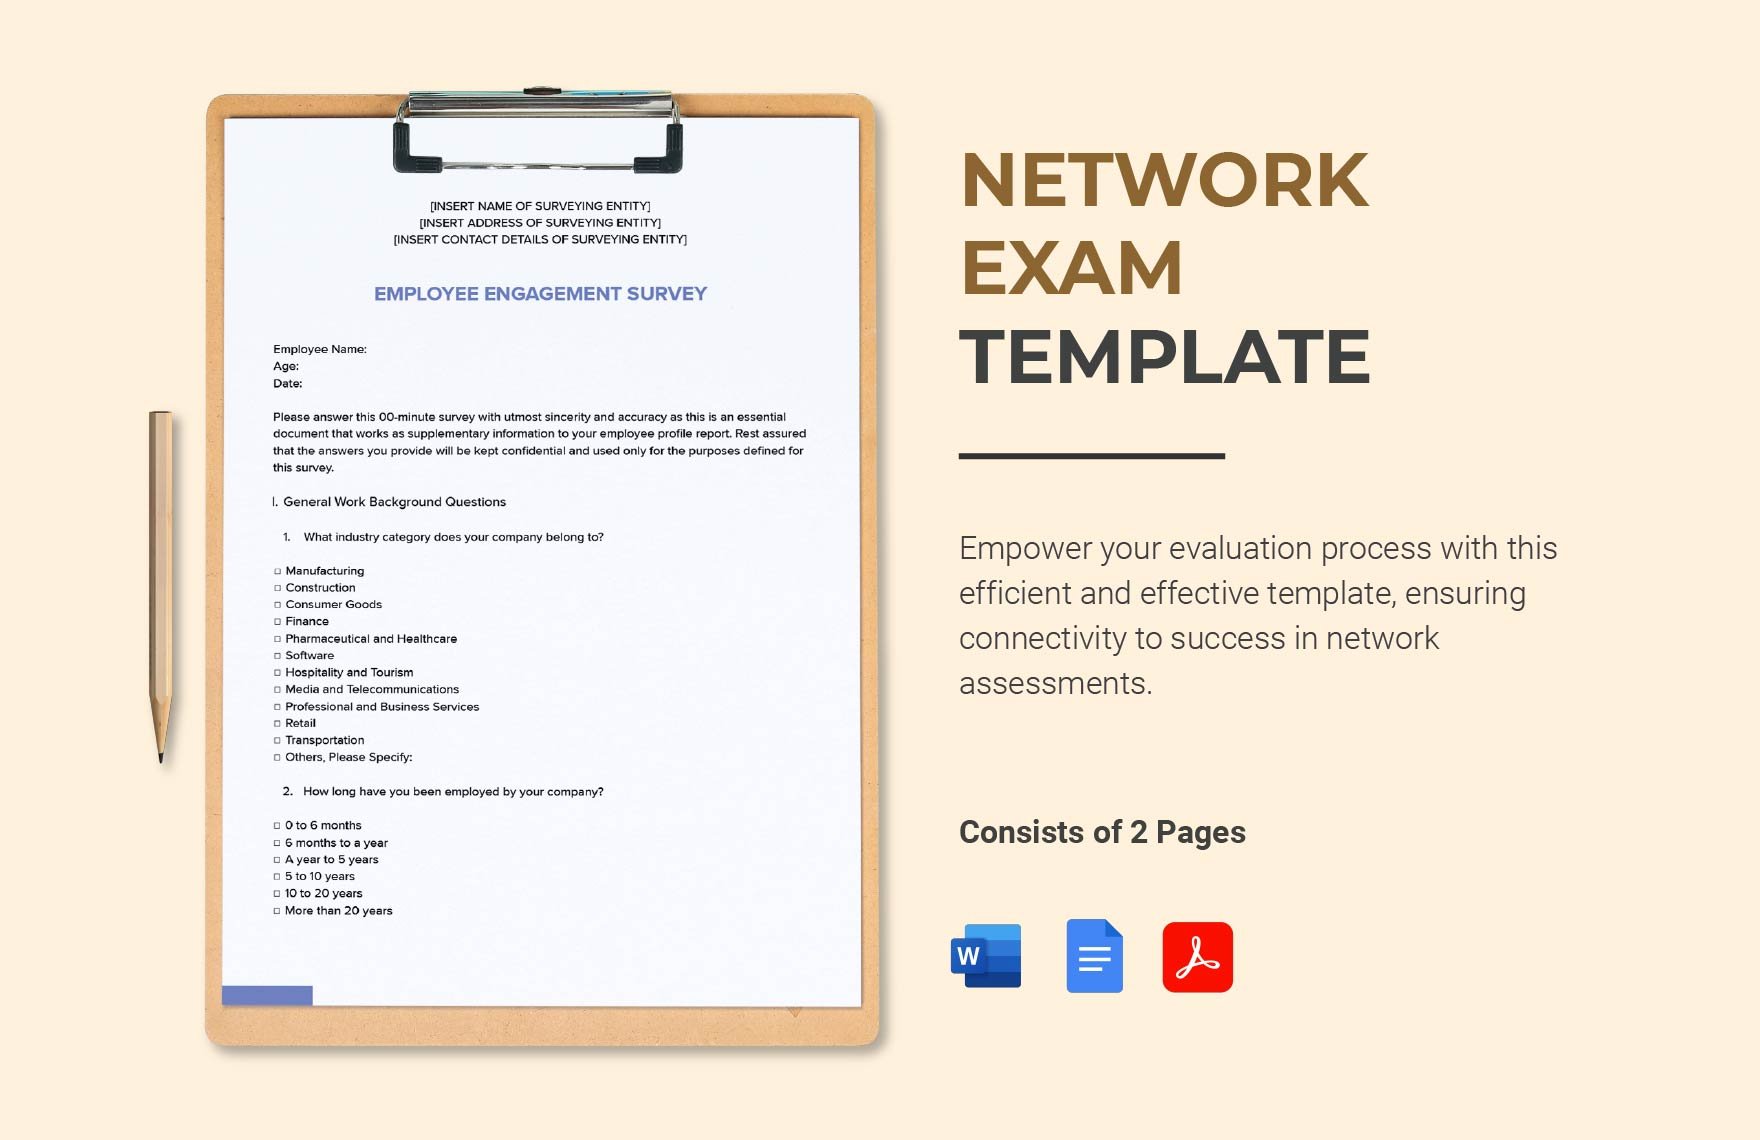 Free Network Exam Template in Word, Google Docs, PDF